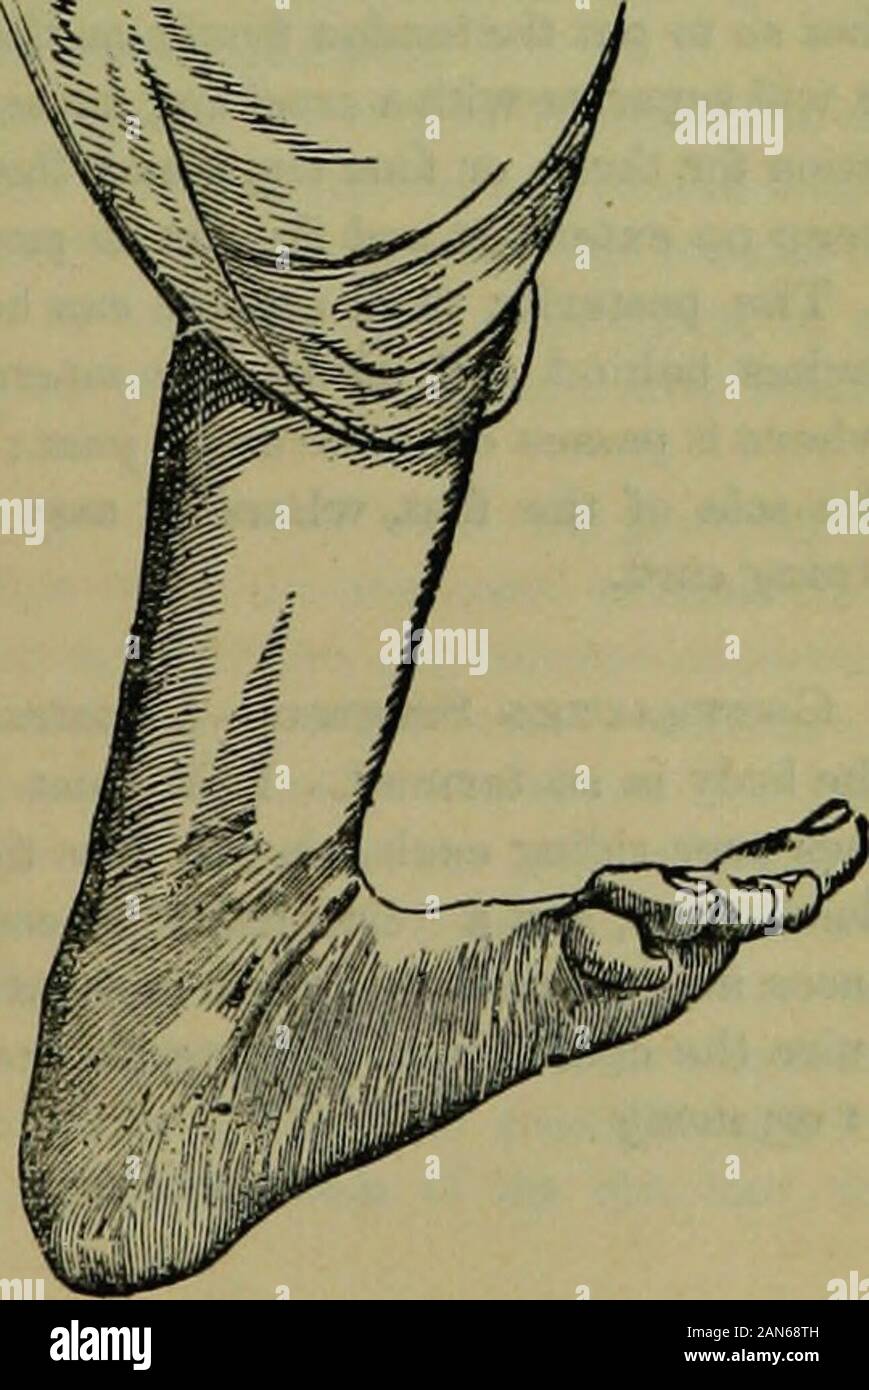 The hydropathic encyclopedia: a system of hydropathy and hygiene .. . TALIPES VARUS. TALIPES EQUINAS. inward, the patient walking on the outside of it, the heel being e*evated. In the second variety Fig. 215. —talipes equinas—fig. 214, theheel is more or less elevated, thepatient walking on the ball ofthe foot or on the toes, and pres-sing equally on all the toes, orprincipally on the side of the lit-tle, or that of the great toe. Inthe third—talipes valgus—thefoot is turned out so that thepatient walks on the inner sur-face, the external edge beingraised from the ground, and theBole standing Stock Photo